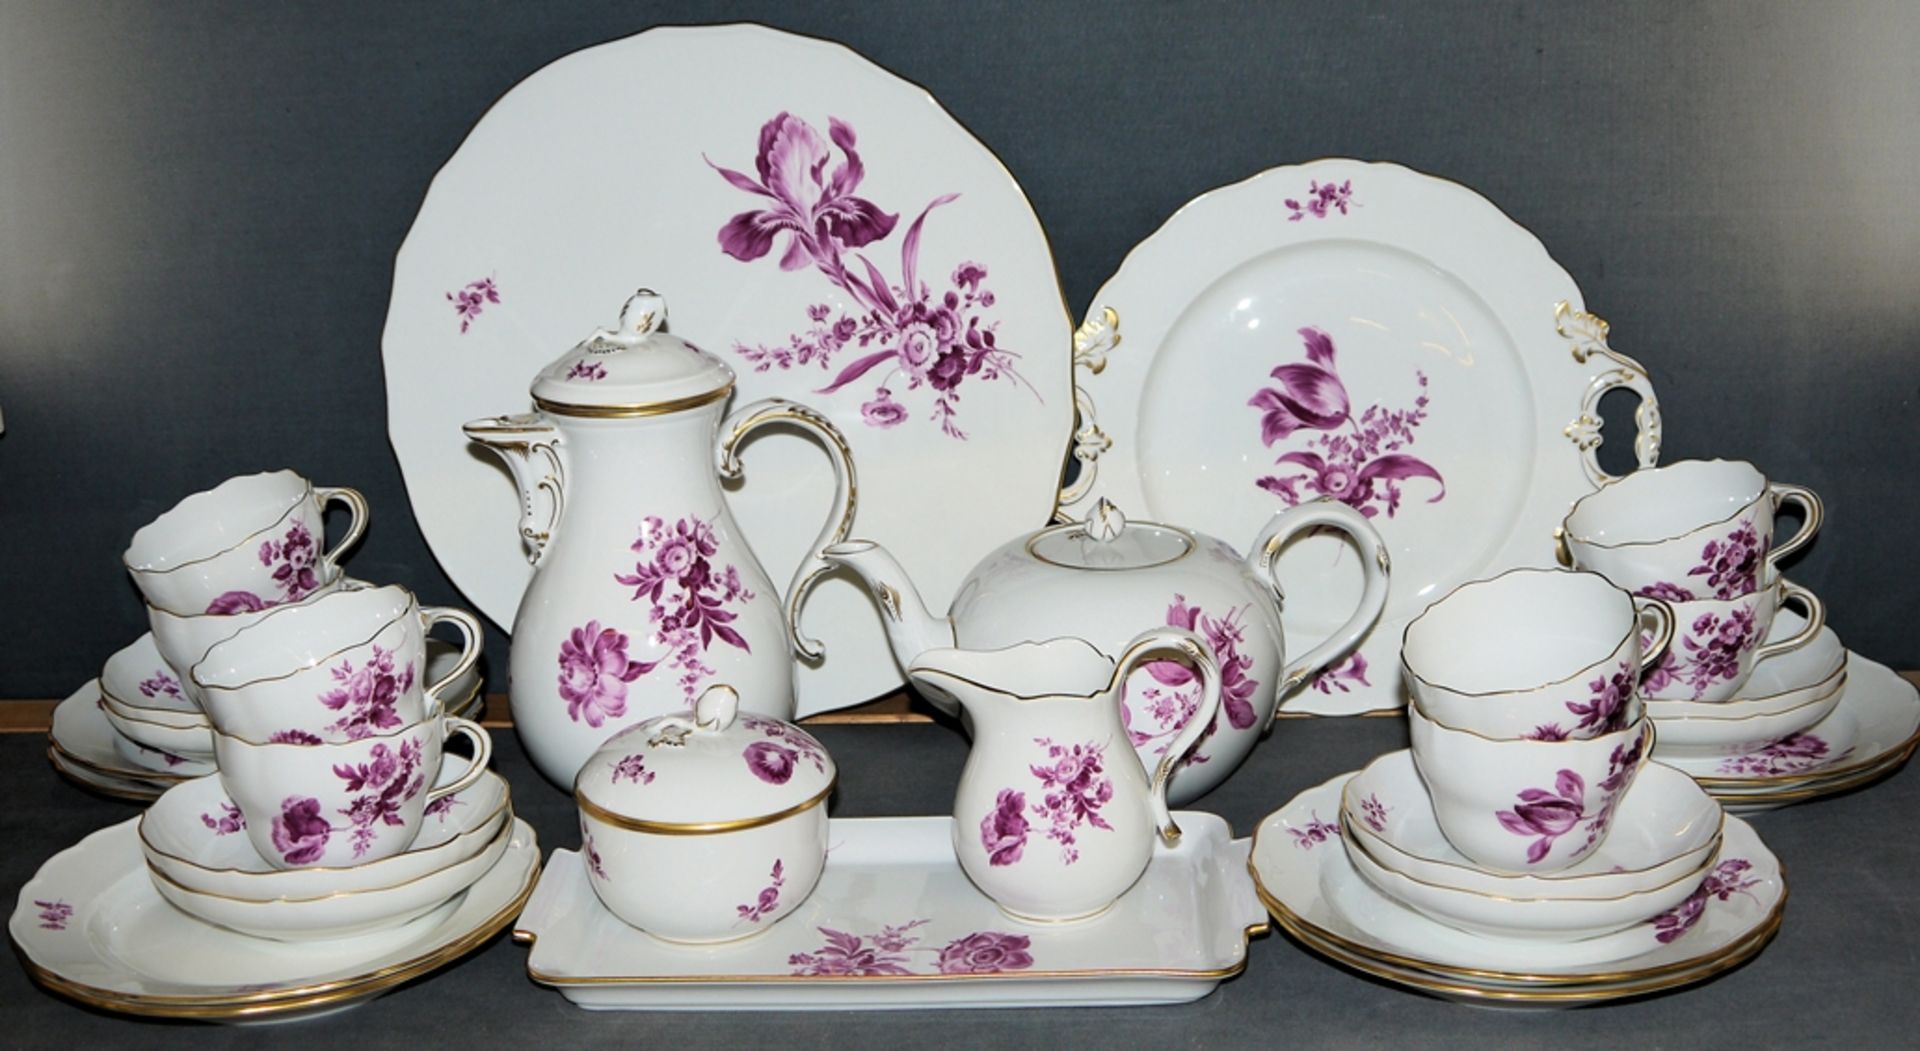 31-piece coffee and tea service with floral painting in purple Camaieu, Royal Meissen 20th century.